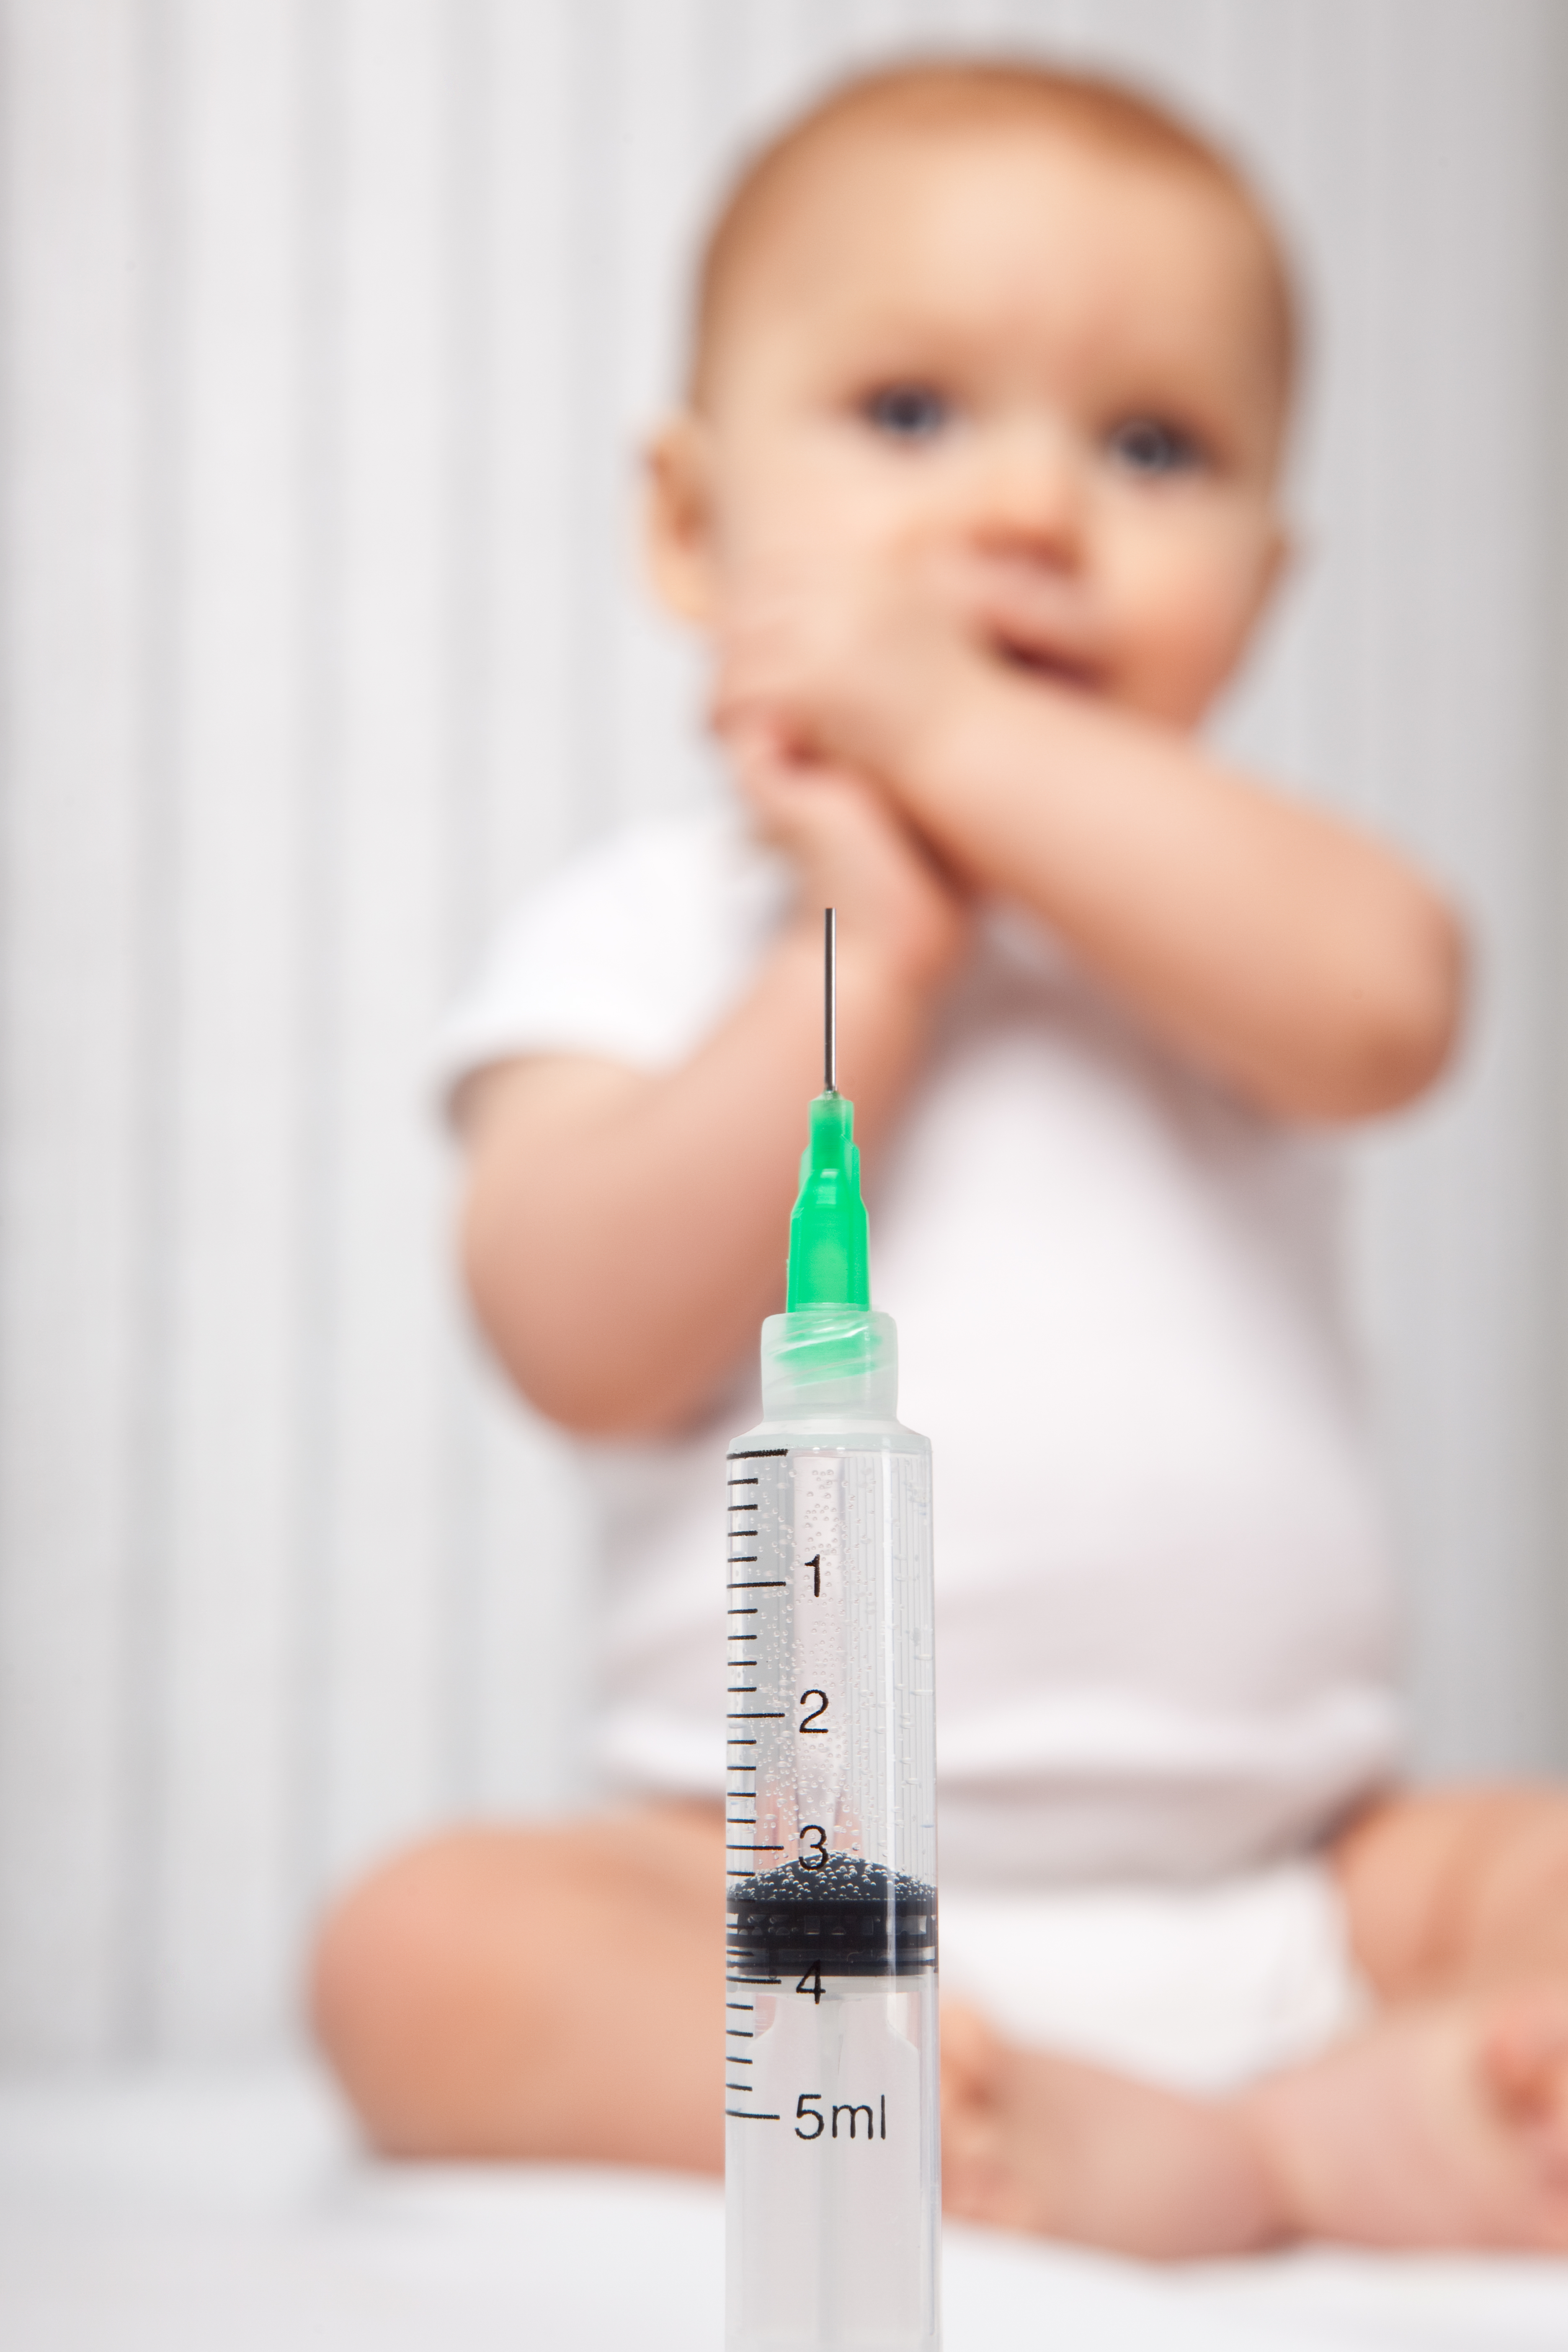 A syringe in focus with an 8 month old baby blurred in the background.